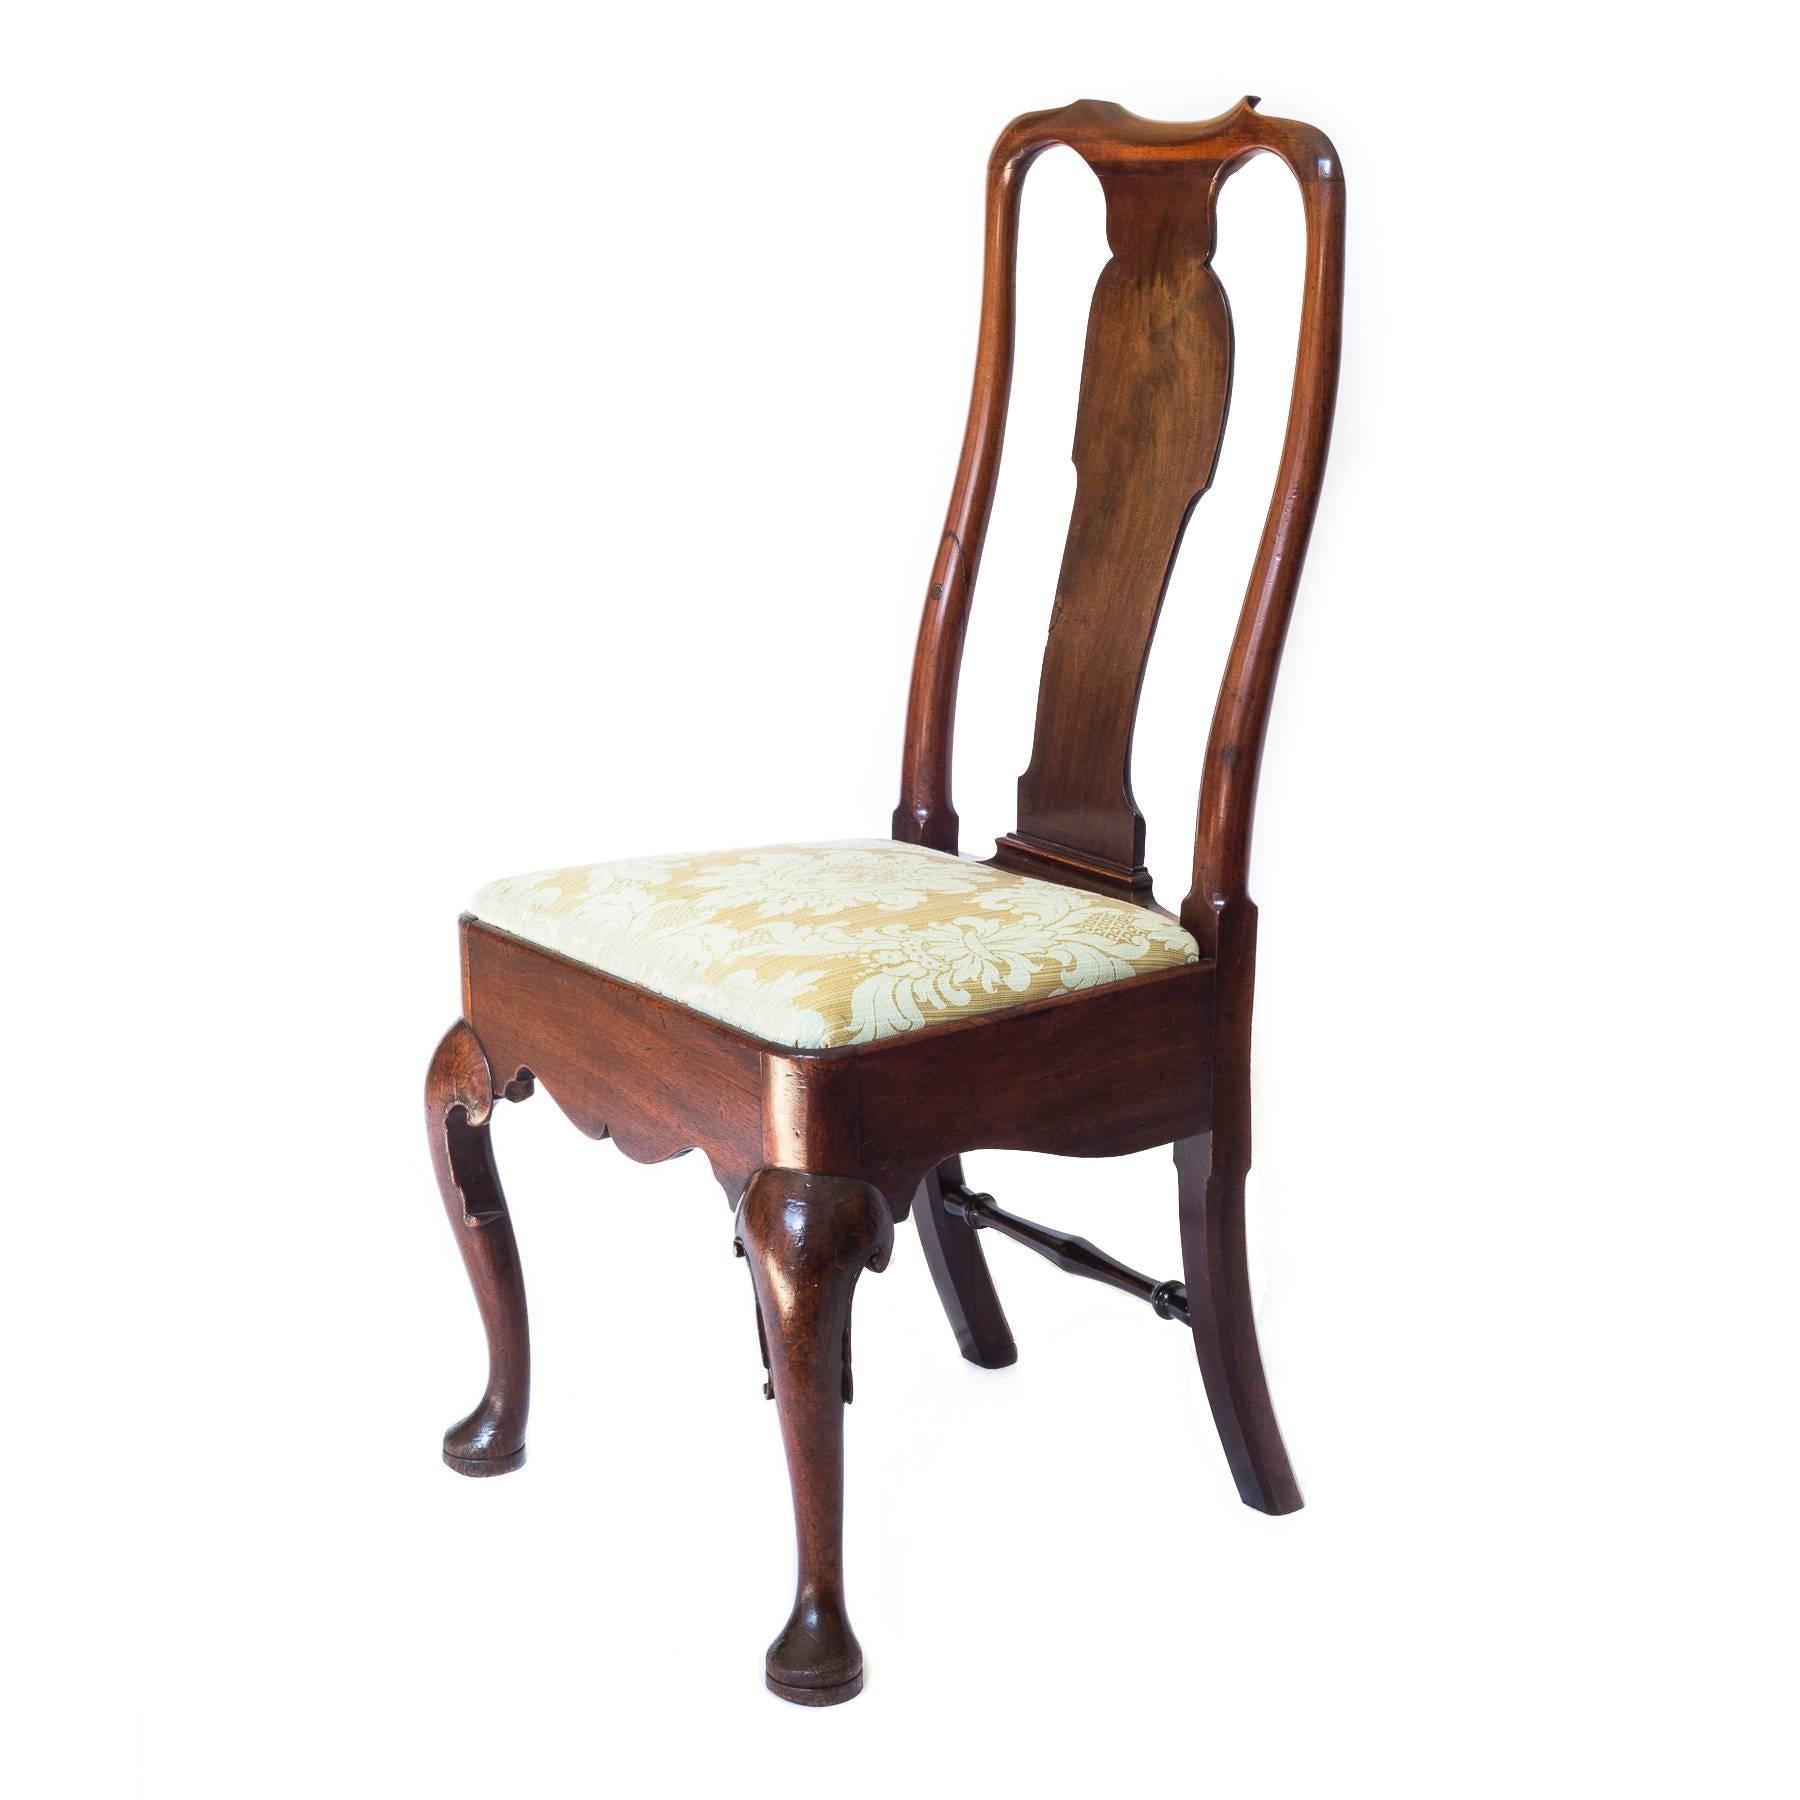 Hand-Carved Fine Early 18th Century English Queen Anne George II Mahogany Chair, c. 1730